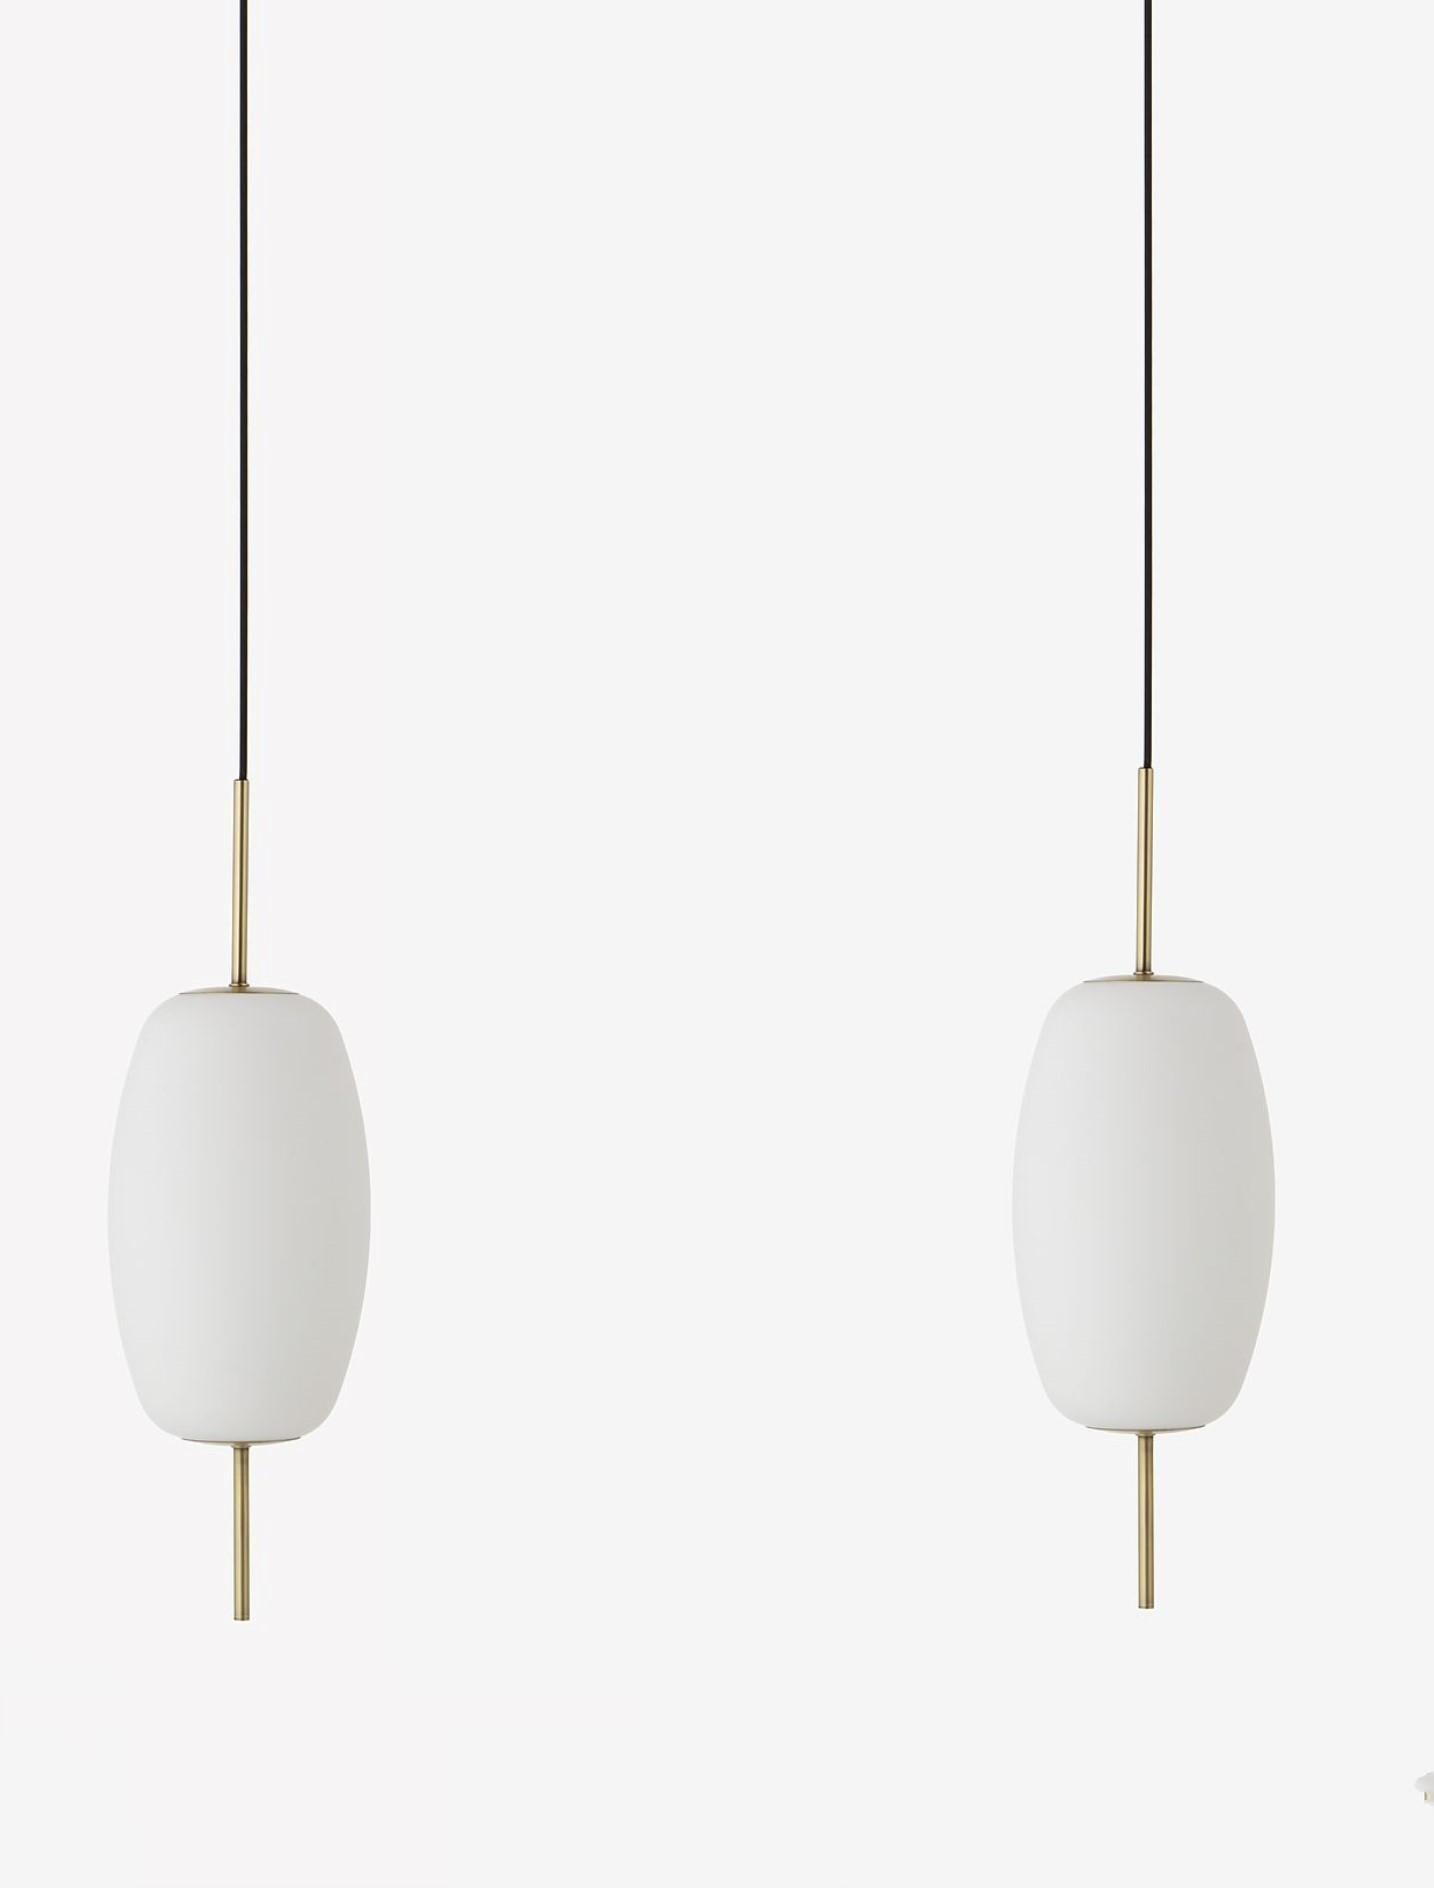 A pair of outstanding danish design light pendants, satin glasss, brushed brass mounts and canopy with black kord, Denmark, 2020.
One Edison E-14 light socket for a screw bulb up to 40watt.
Measures: 
Height of pendant with brass and canopy: 25